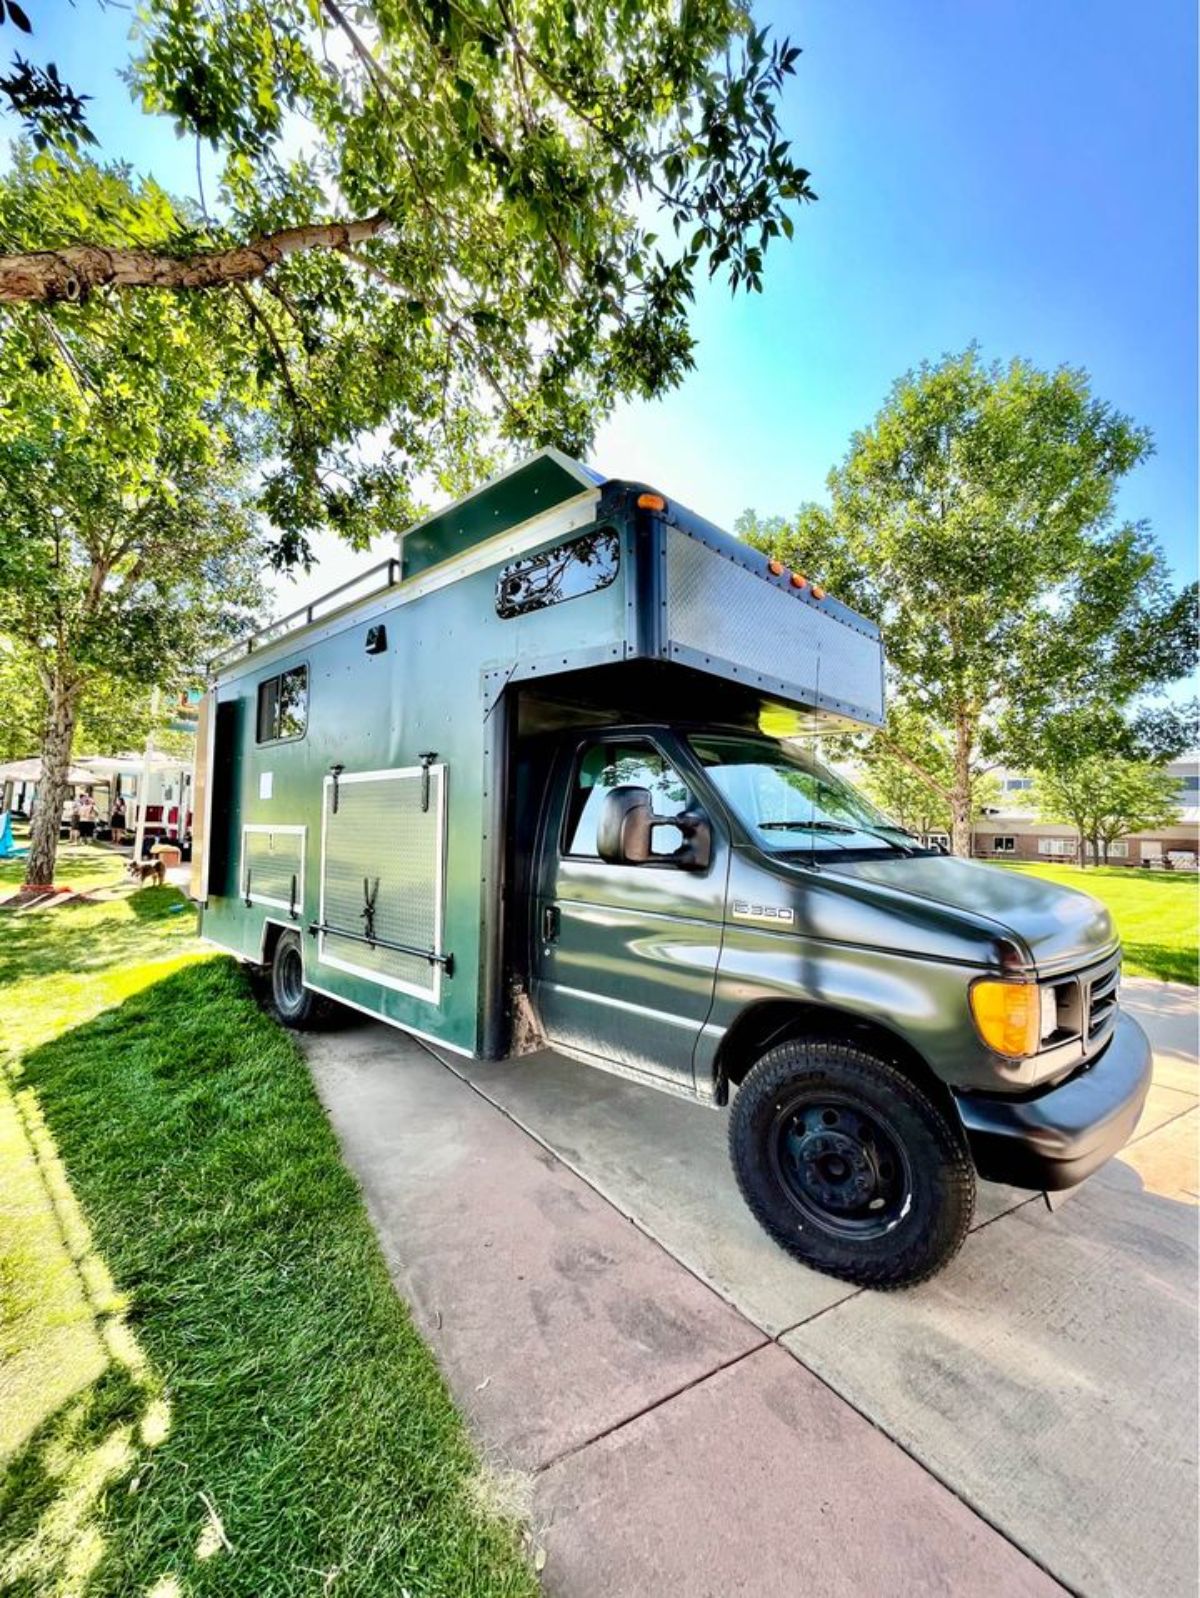 Main entrance view of Modified Ford E-350 Is an Off the grid camper for $100K